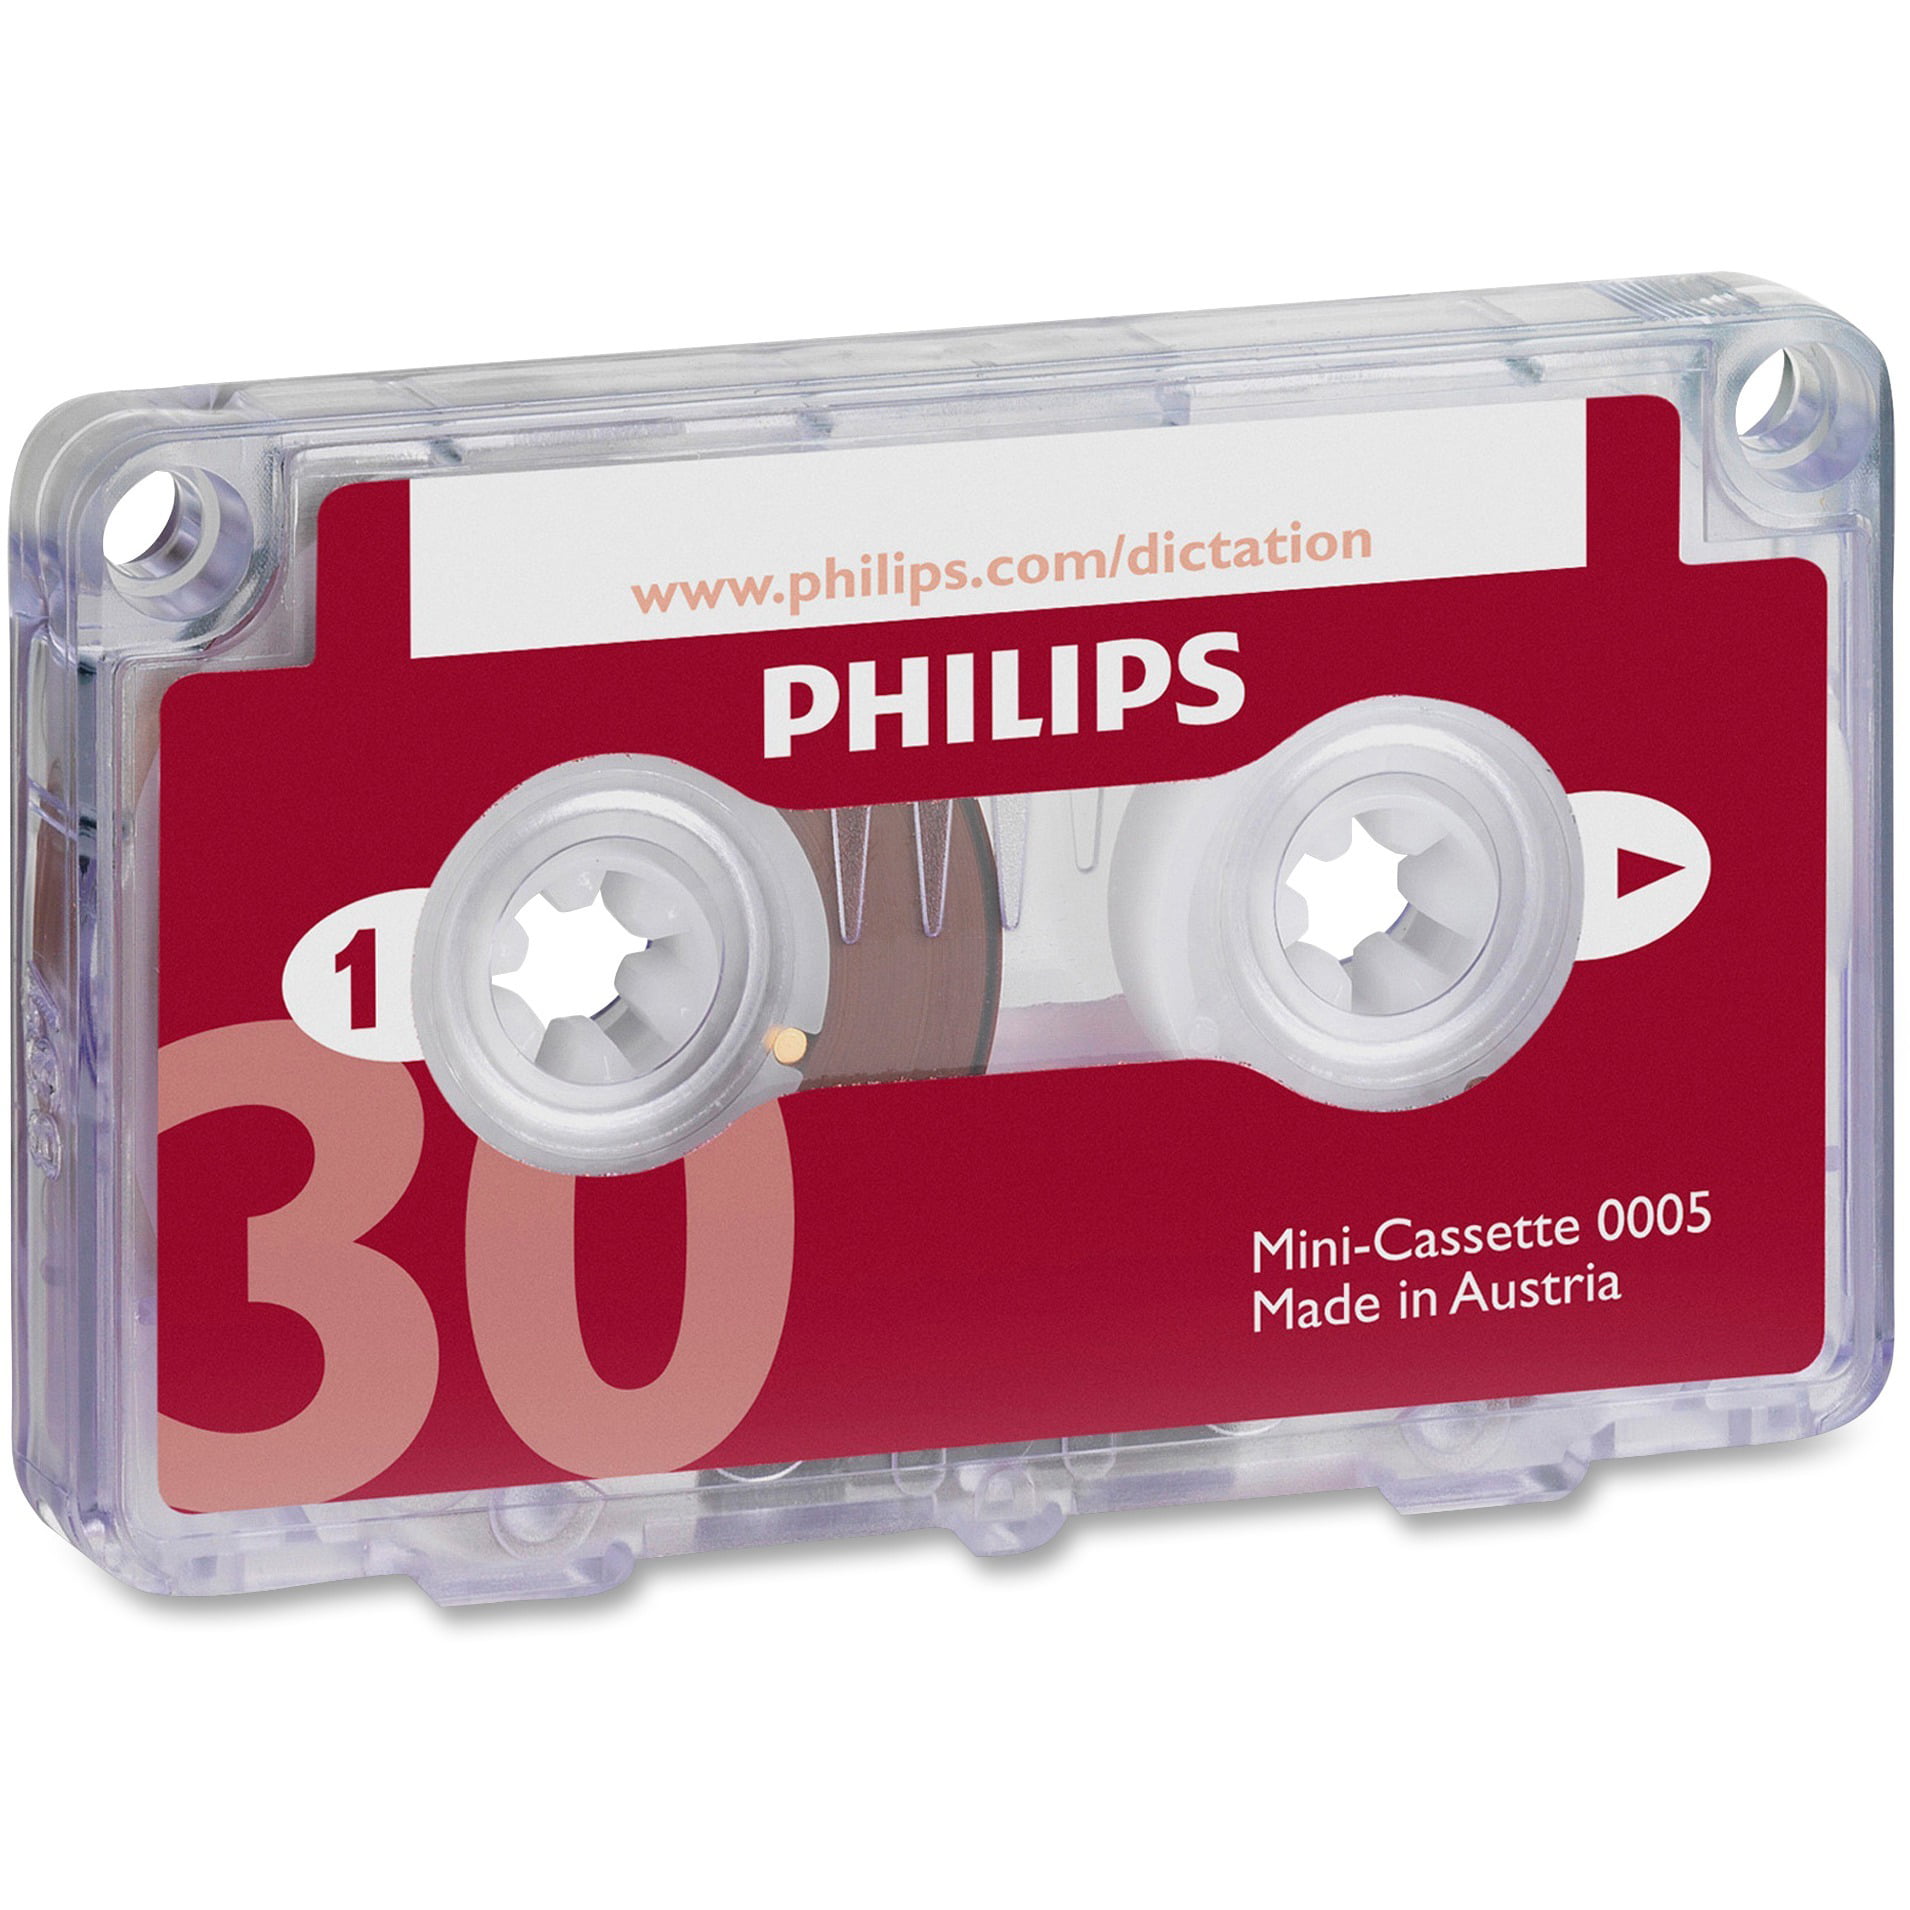 Philips Mini Cassettes for dictation LFH0005 pack of 10 Cassettes FREE P&P 